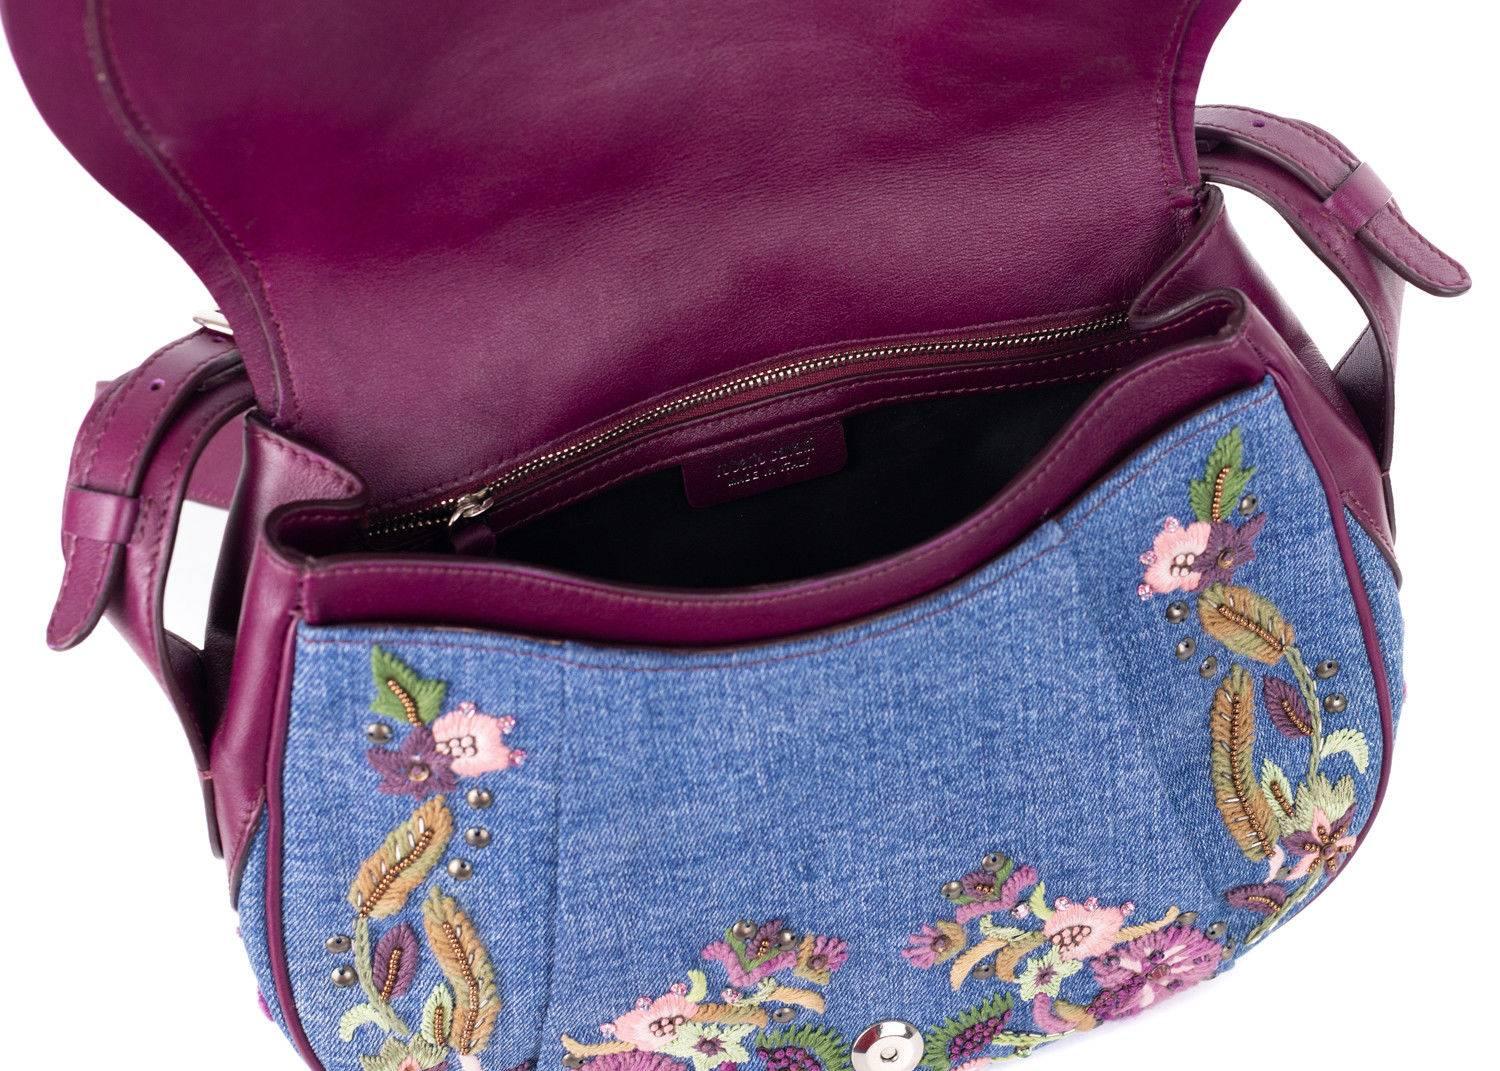 Roberto Cavalli Denim Floral Embroidered Embellishment Shoulder Bag In New Condition For Sale In Brooklyn, NY